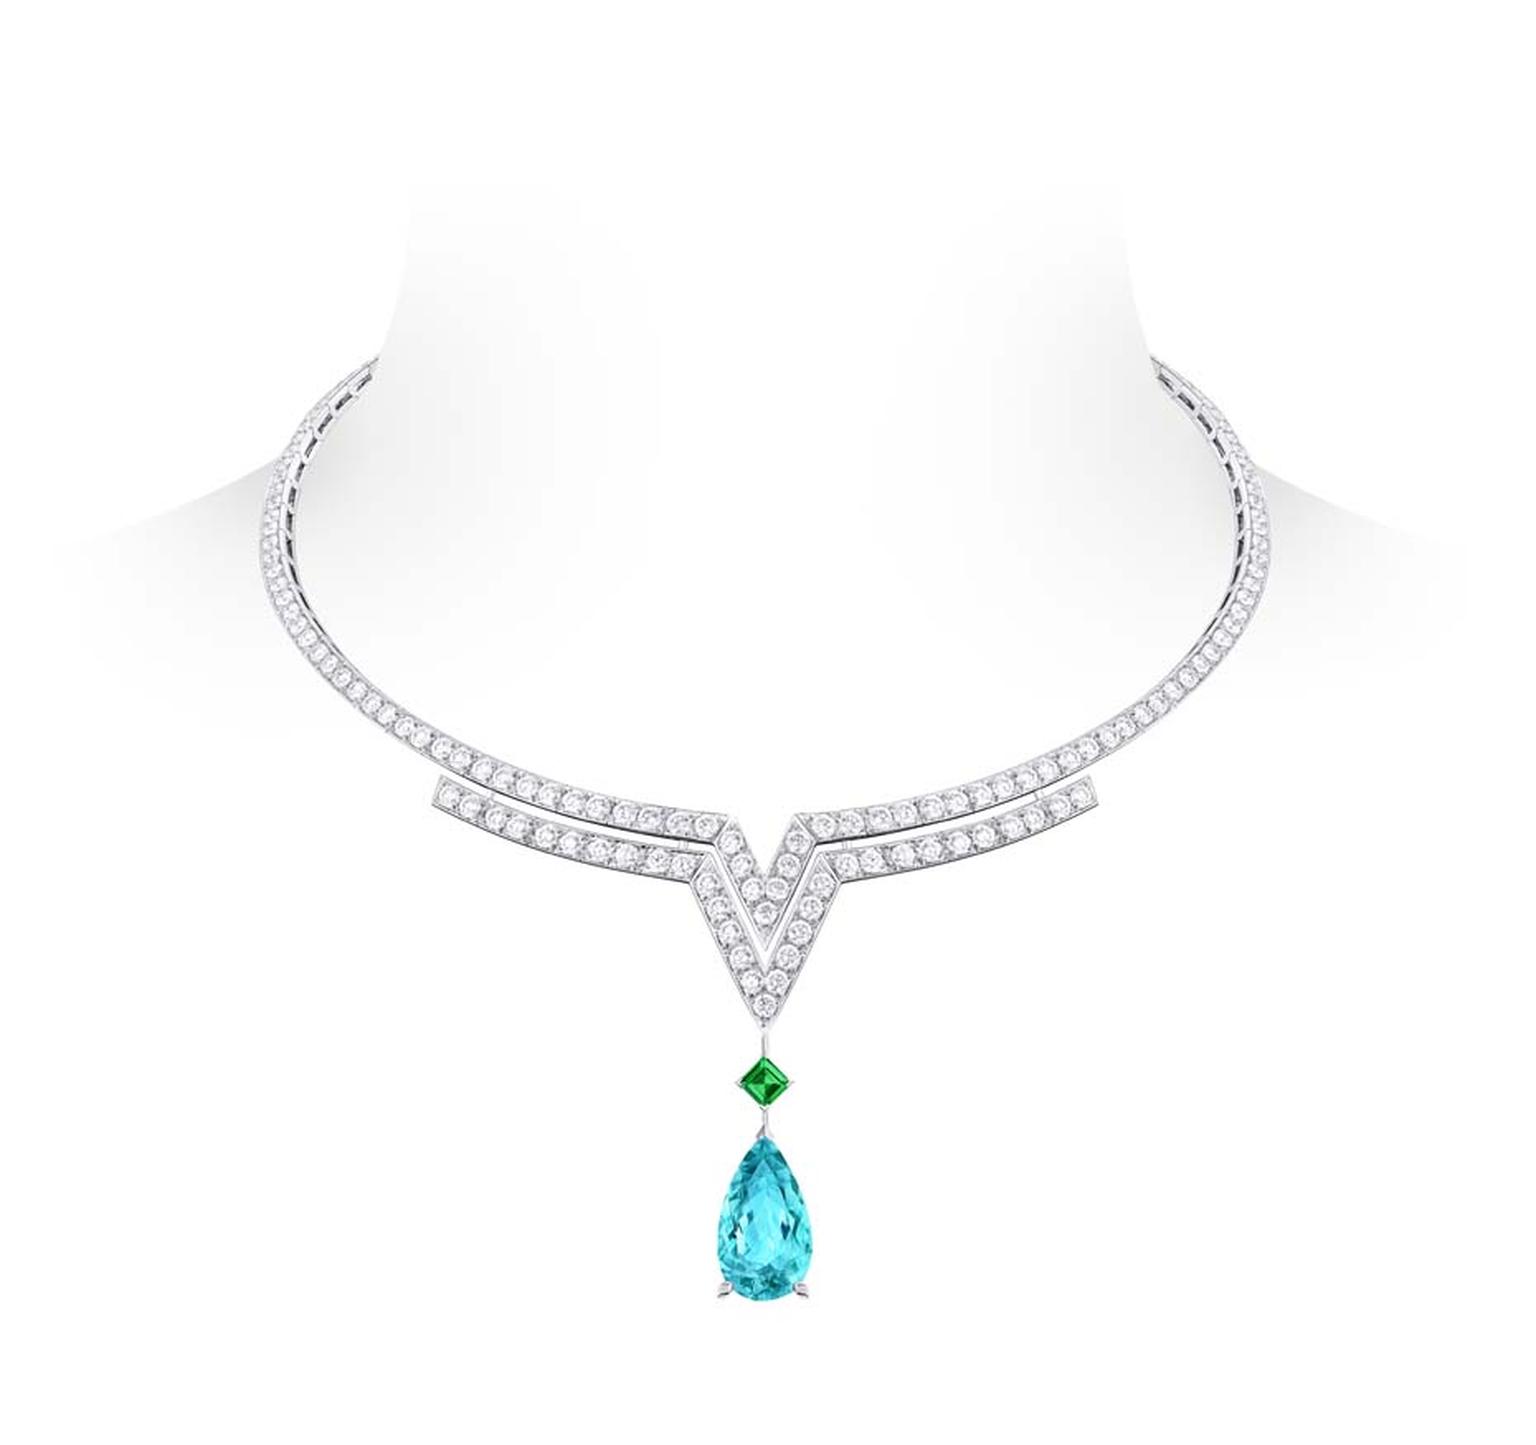 Louis Vuitton Acte V Apotheosis necklace featuring diamonds, an emerald and a pear shaped tourmaline.